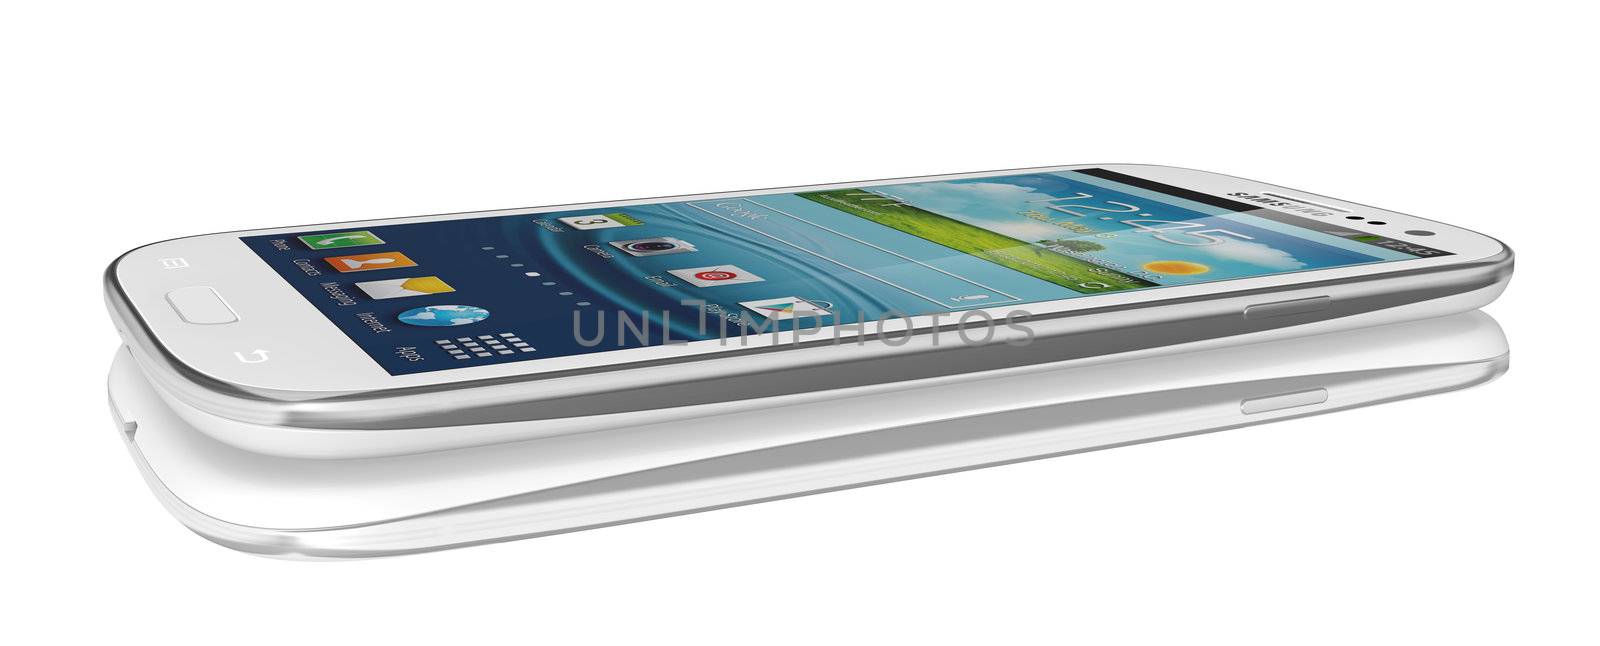 Samsung Galaxy S III Launches In 28 Countries in 2012. Latest phone runs off the latest Android OS, Ice Cream Sandwich (4.0.4), and is powered by a 1.4 GHz quad-core processor, a 2100 mAh battery and  has a 4.8-inch AMOLED display with a HD resolution of 720 x 1,280.